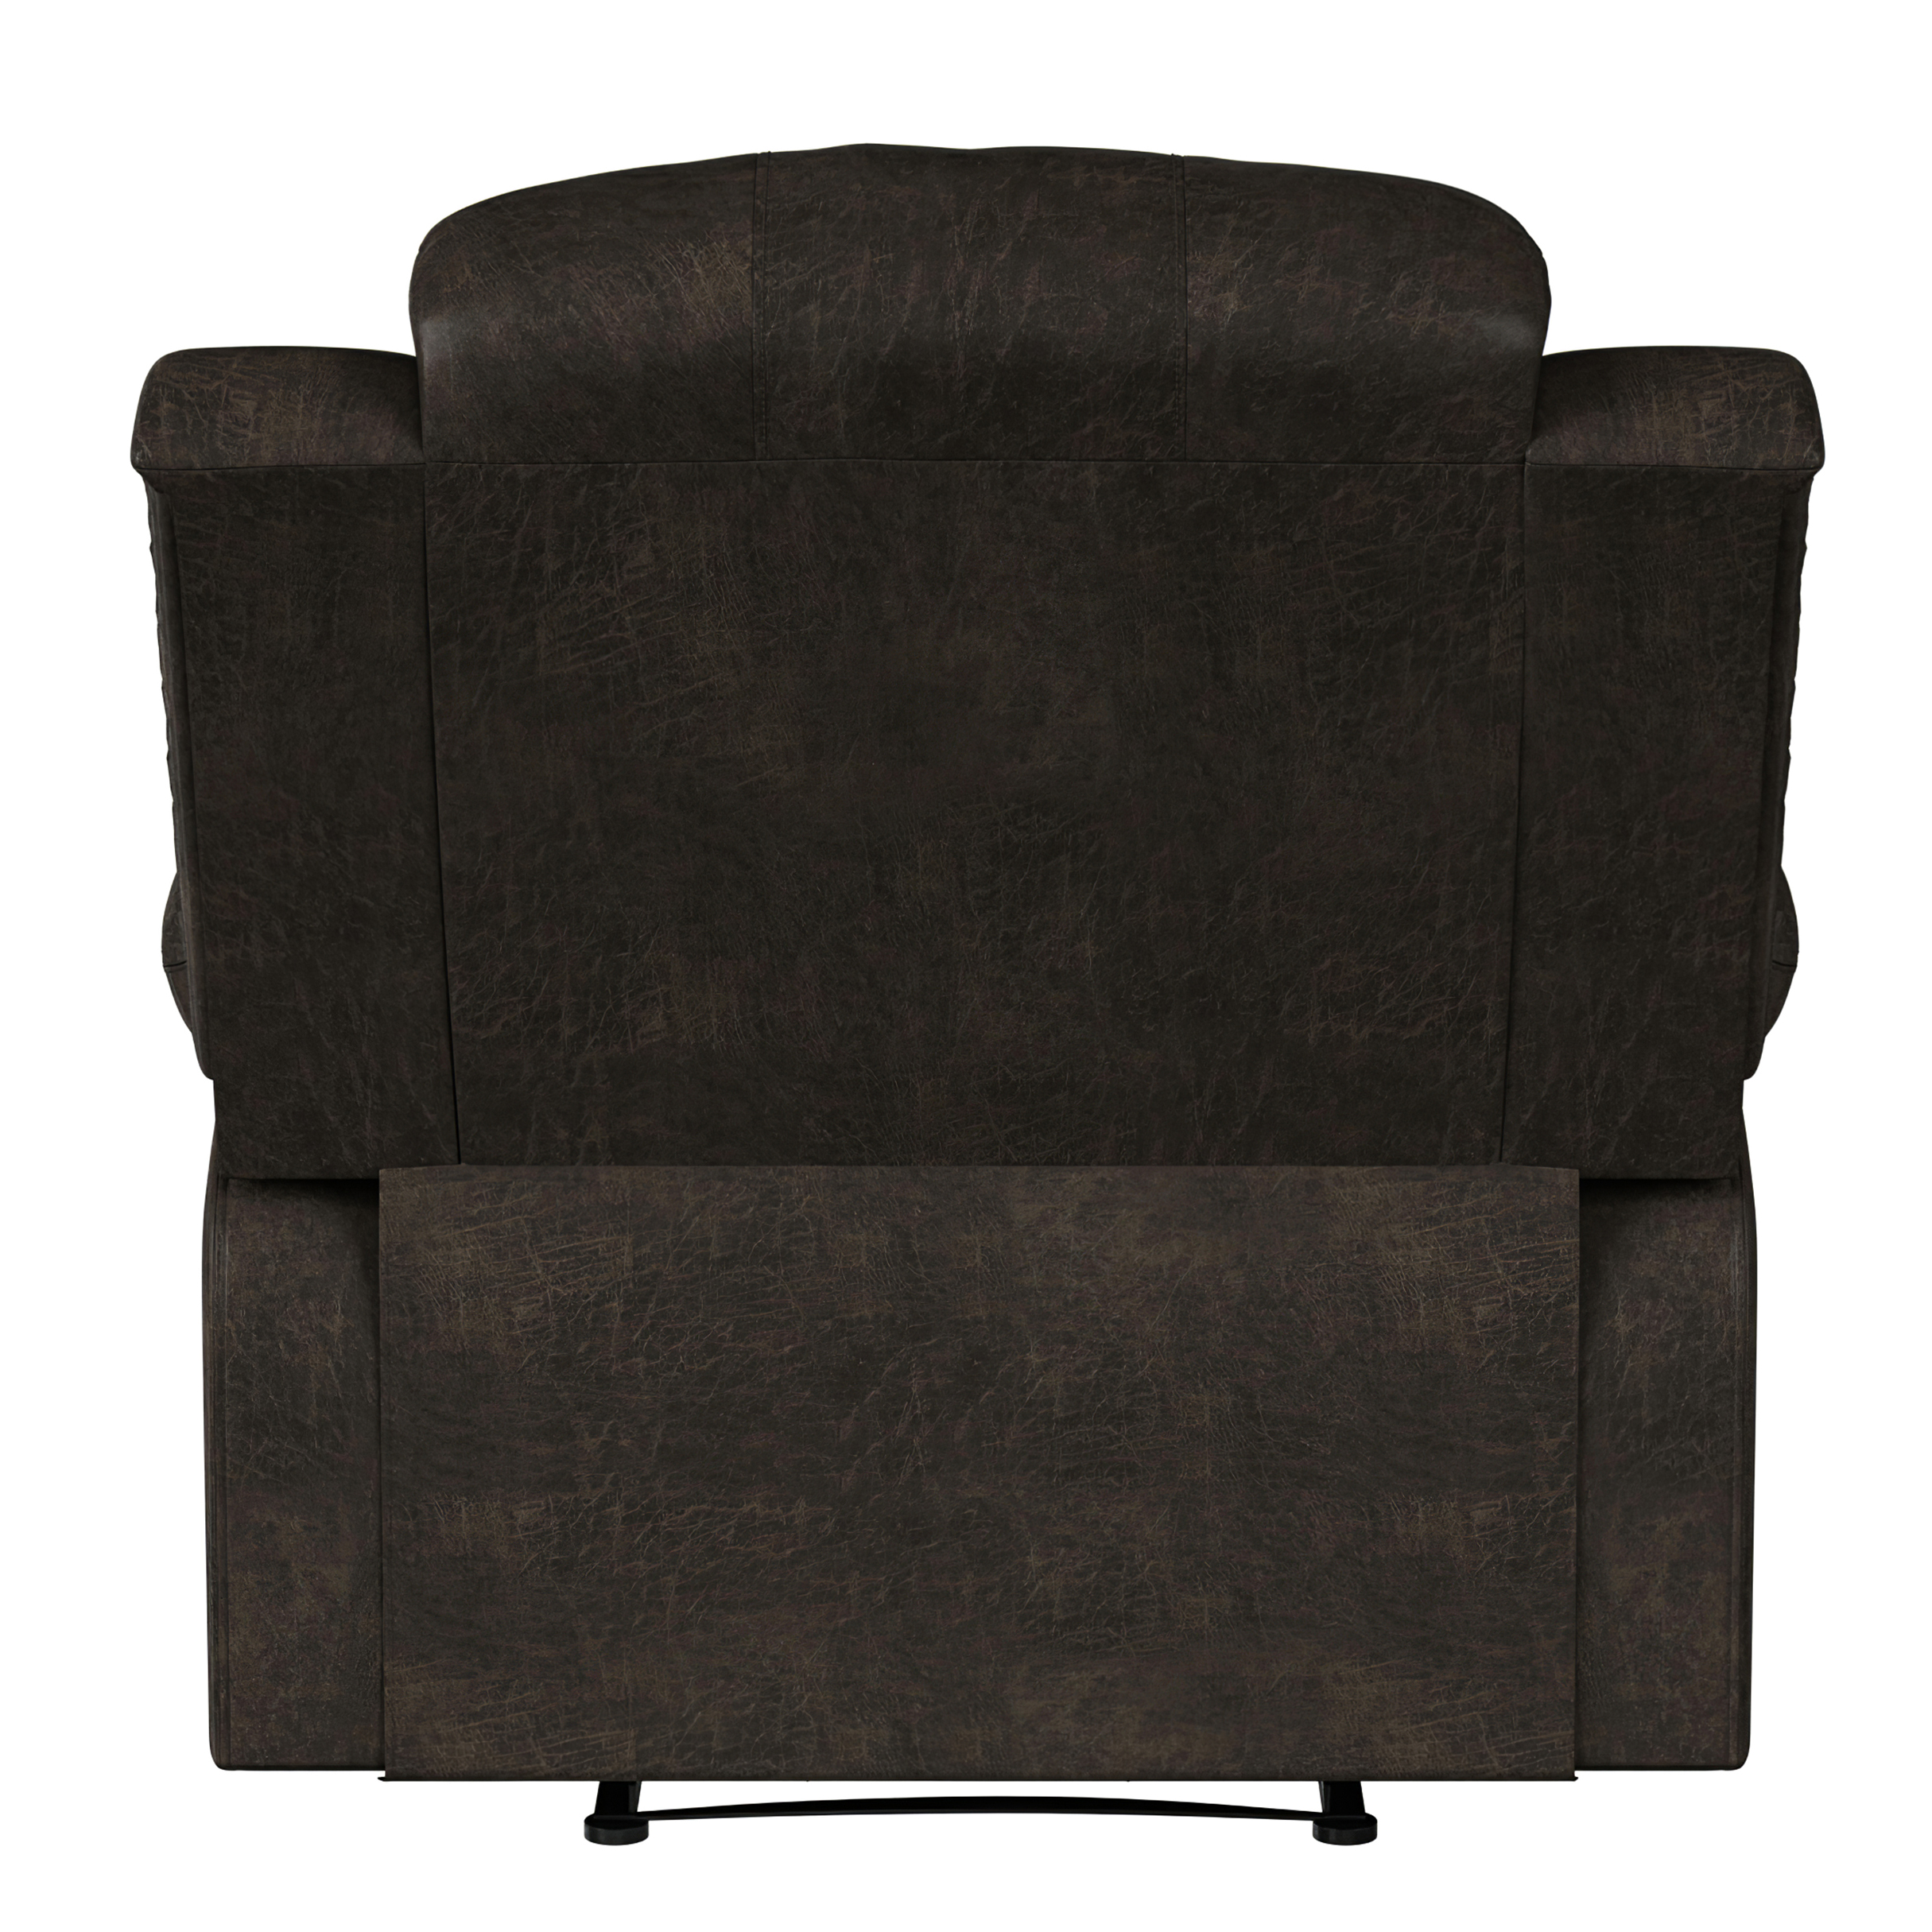 Relax-a-Lounger Reynolds Manual Standard Recliner, Brown Faux Suede - image 3 of 13